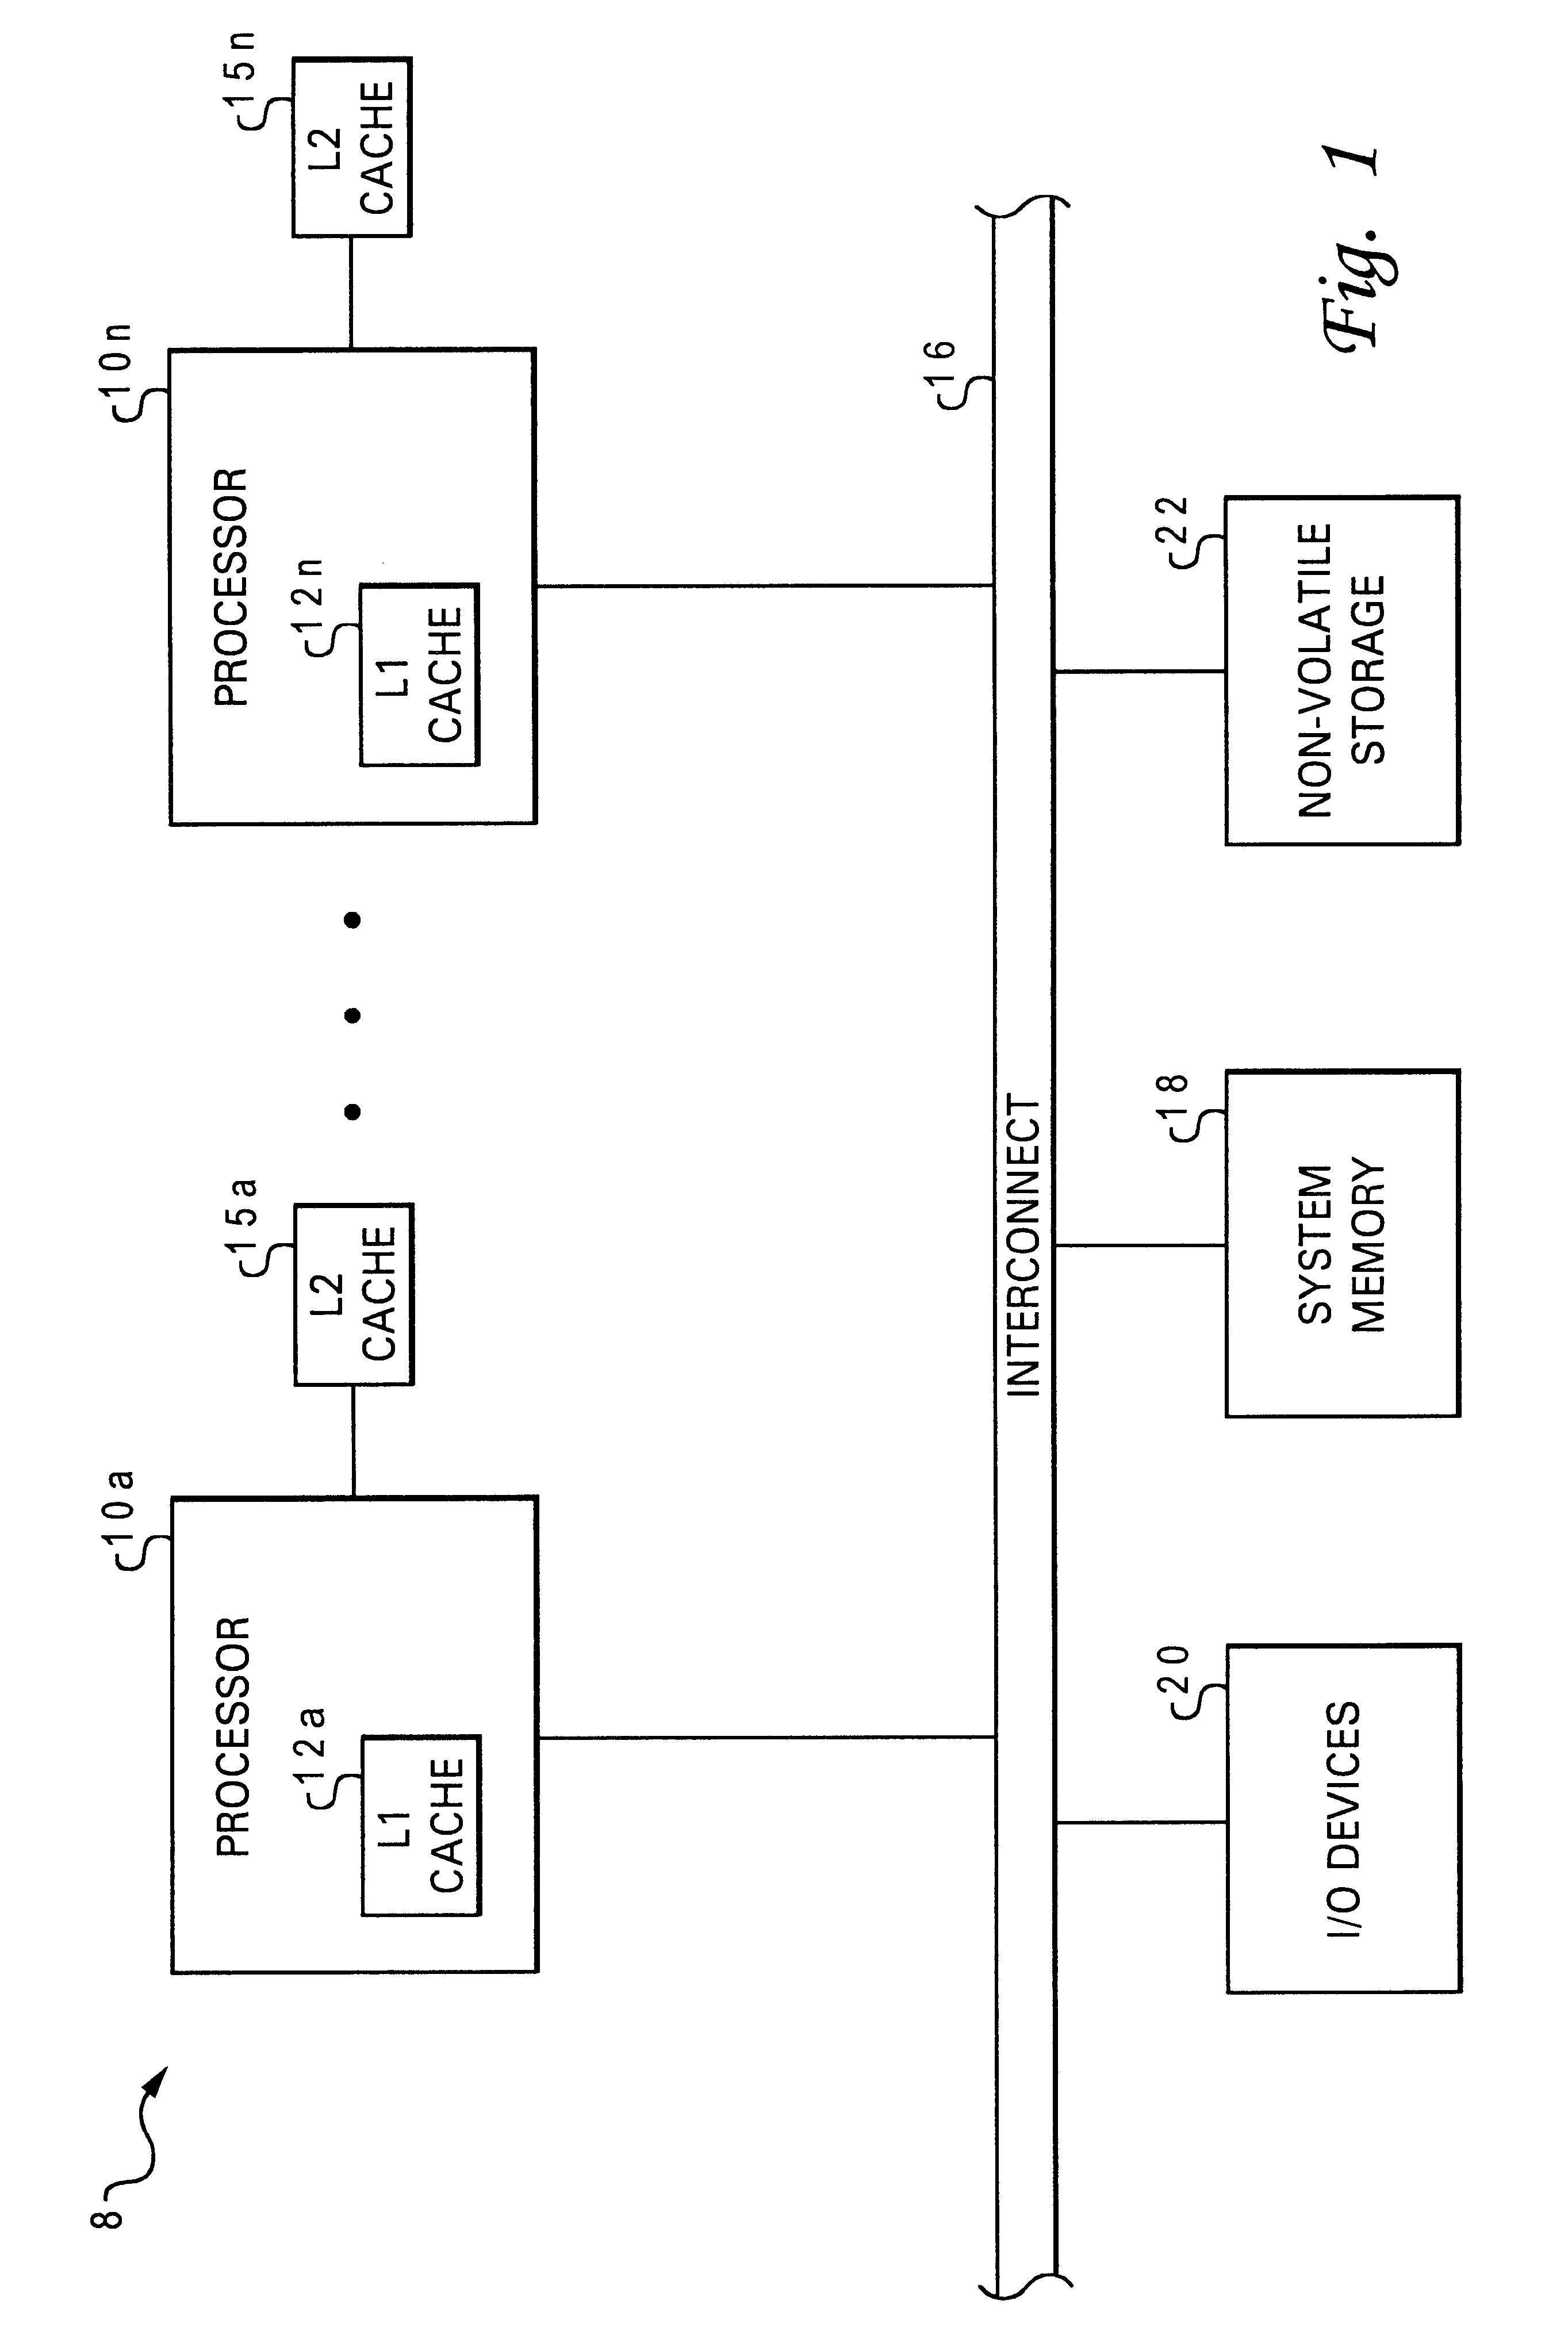 Method for alternate preferred time delivery of load data